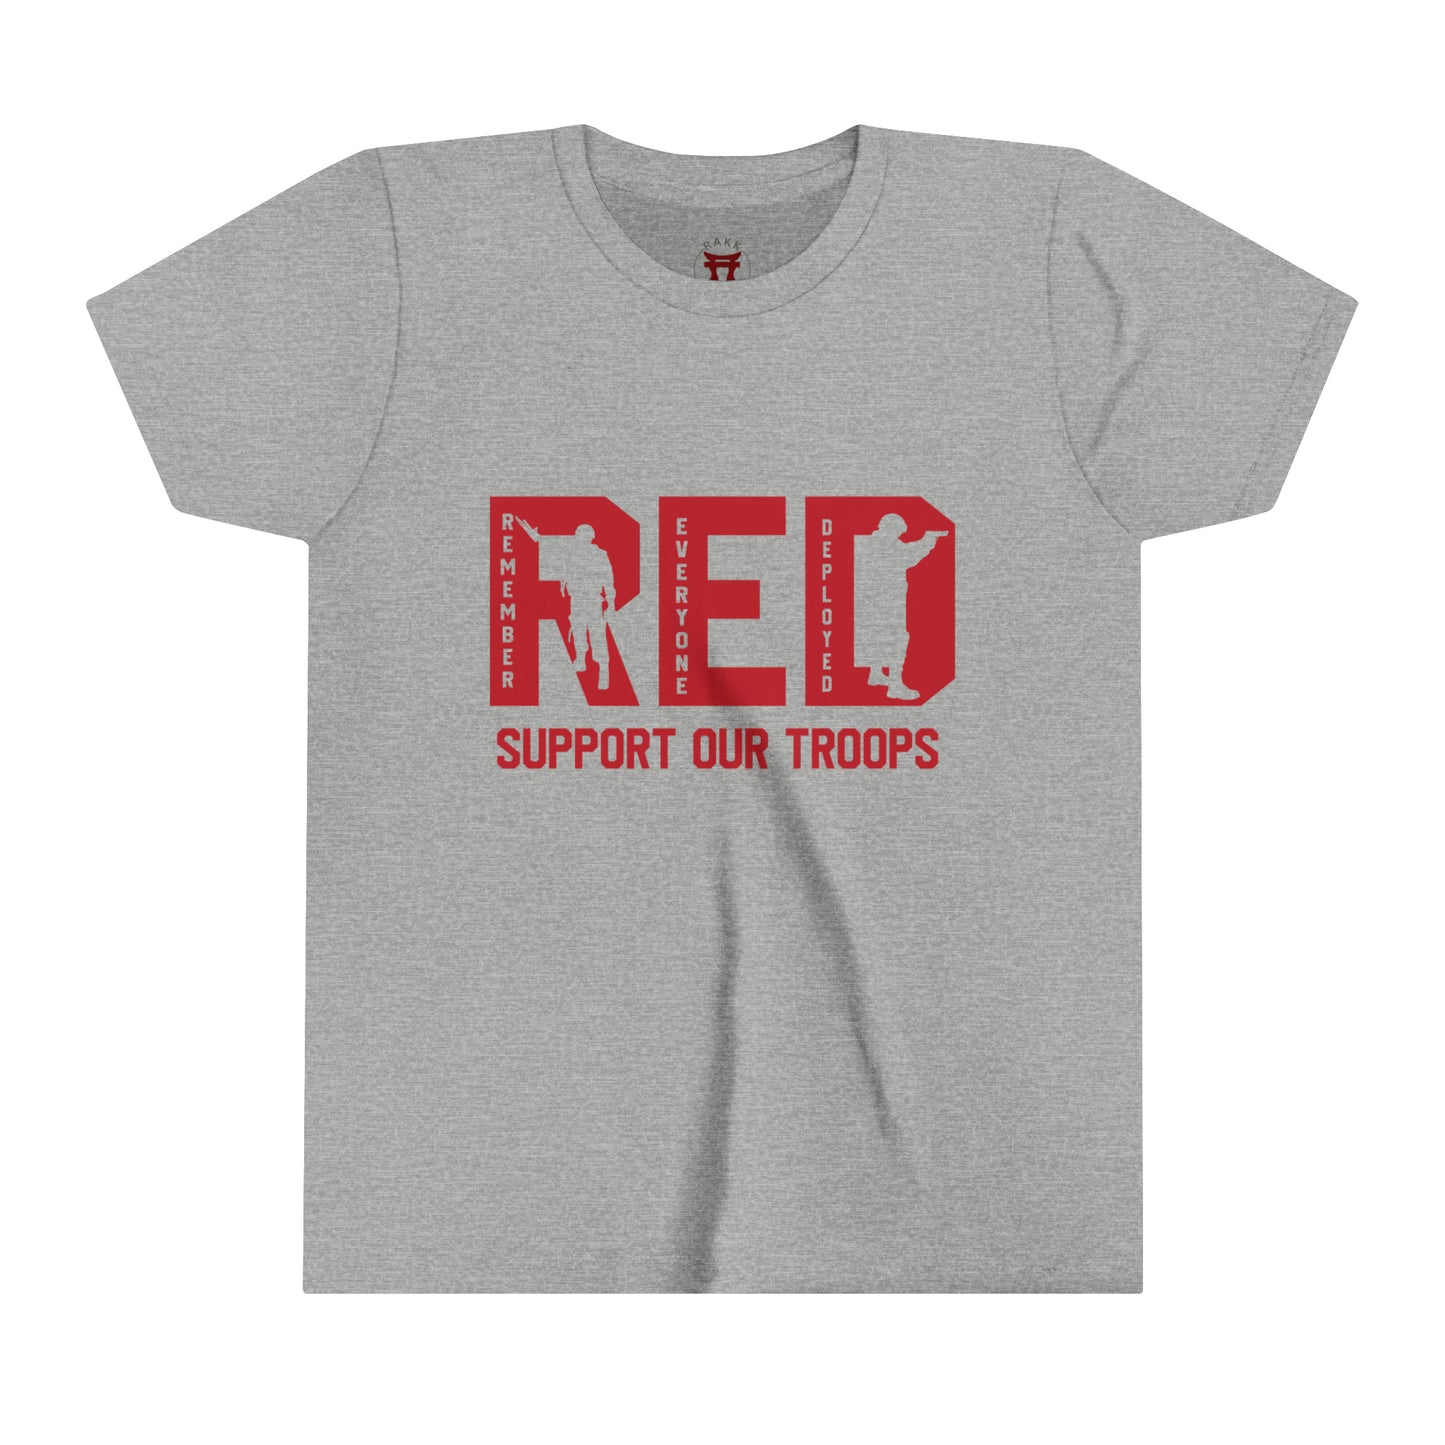 Rakkgear Youth "Remember Everyone Deployed" Grey Tee: Black t-shirt featuring RED letters with 'Support Our Troops' on the front. Iconic Rakkgear Logo on the upper back.